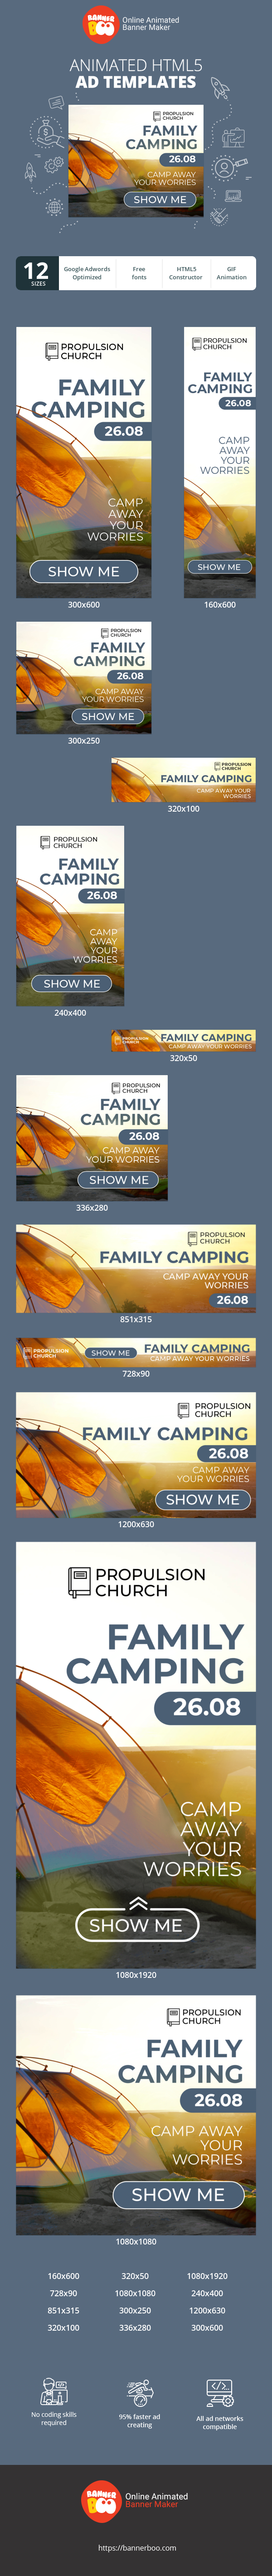 Banner ad template — Family Camping — 26.08 Camp Away Your Worries